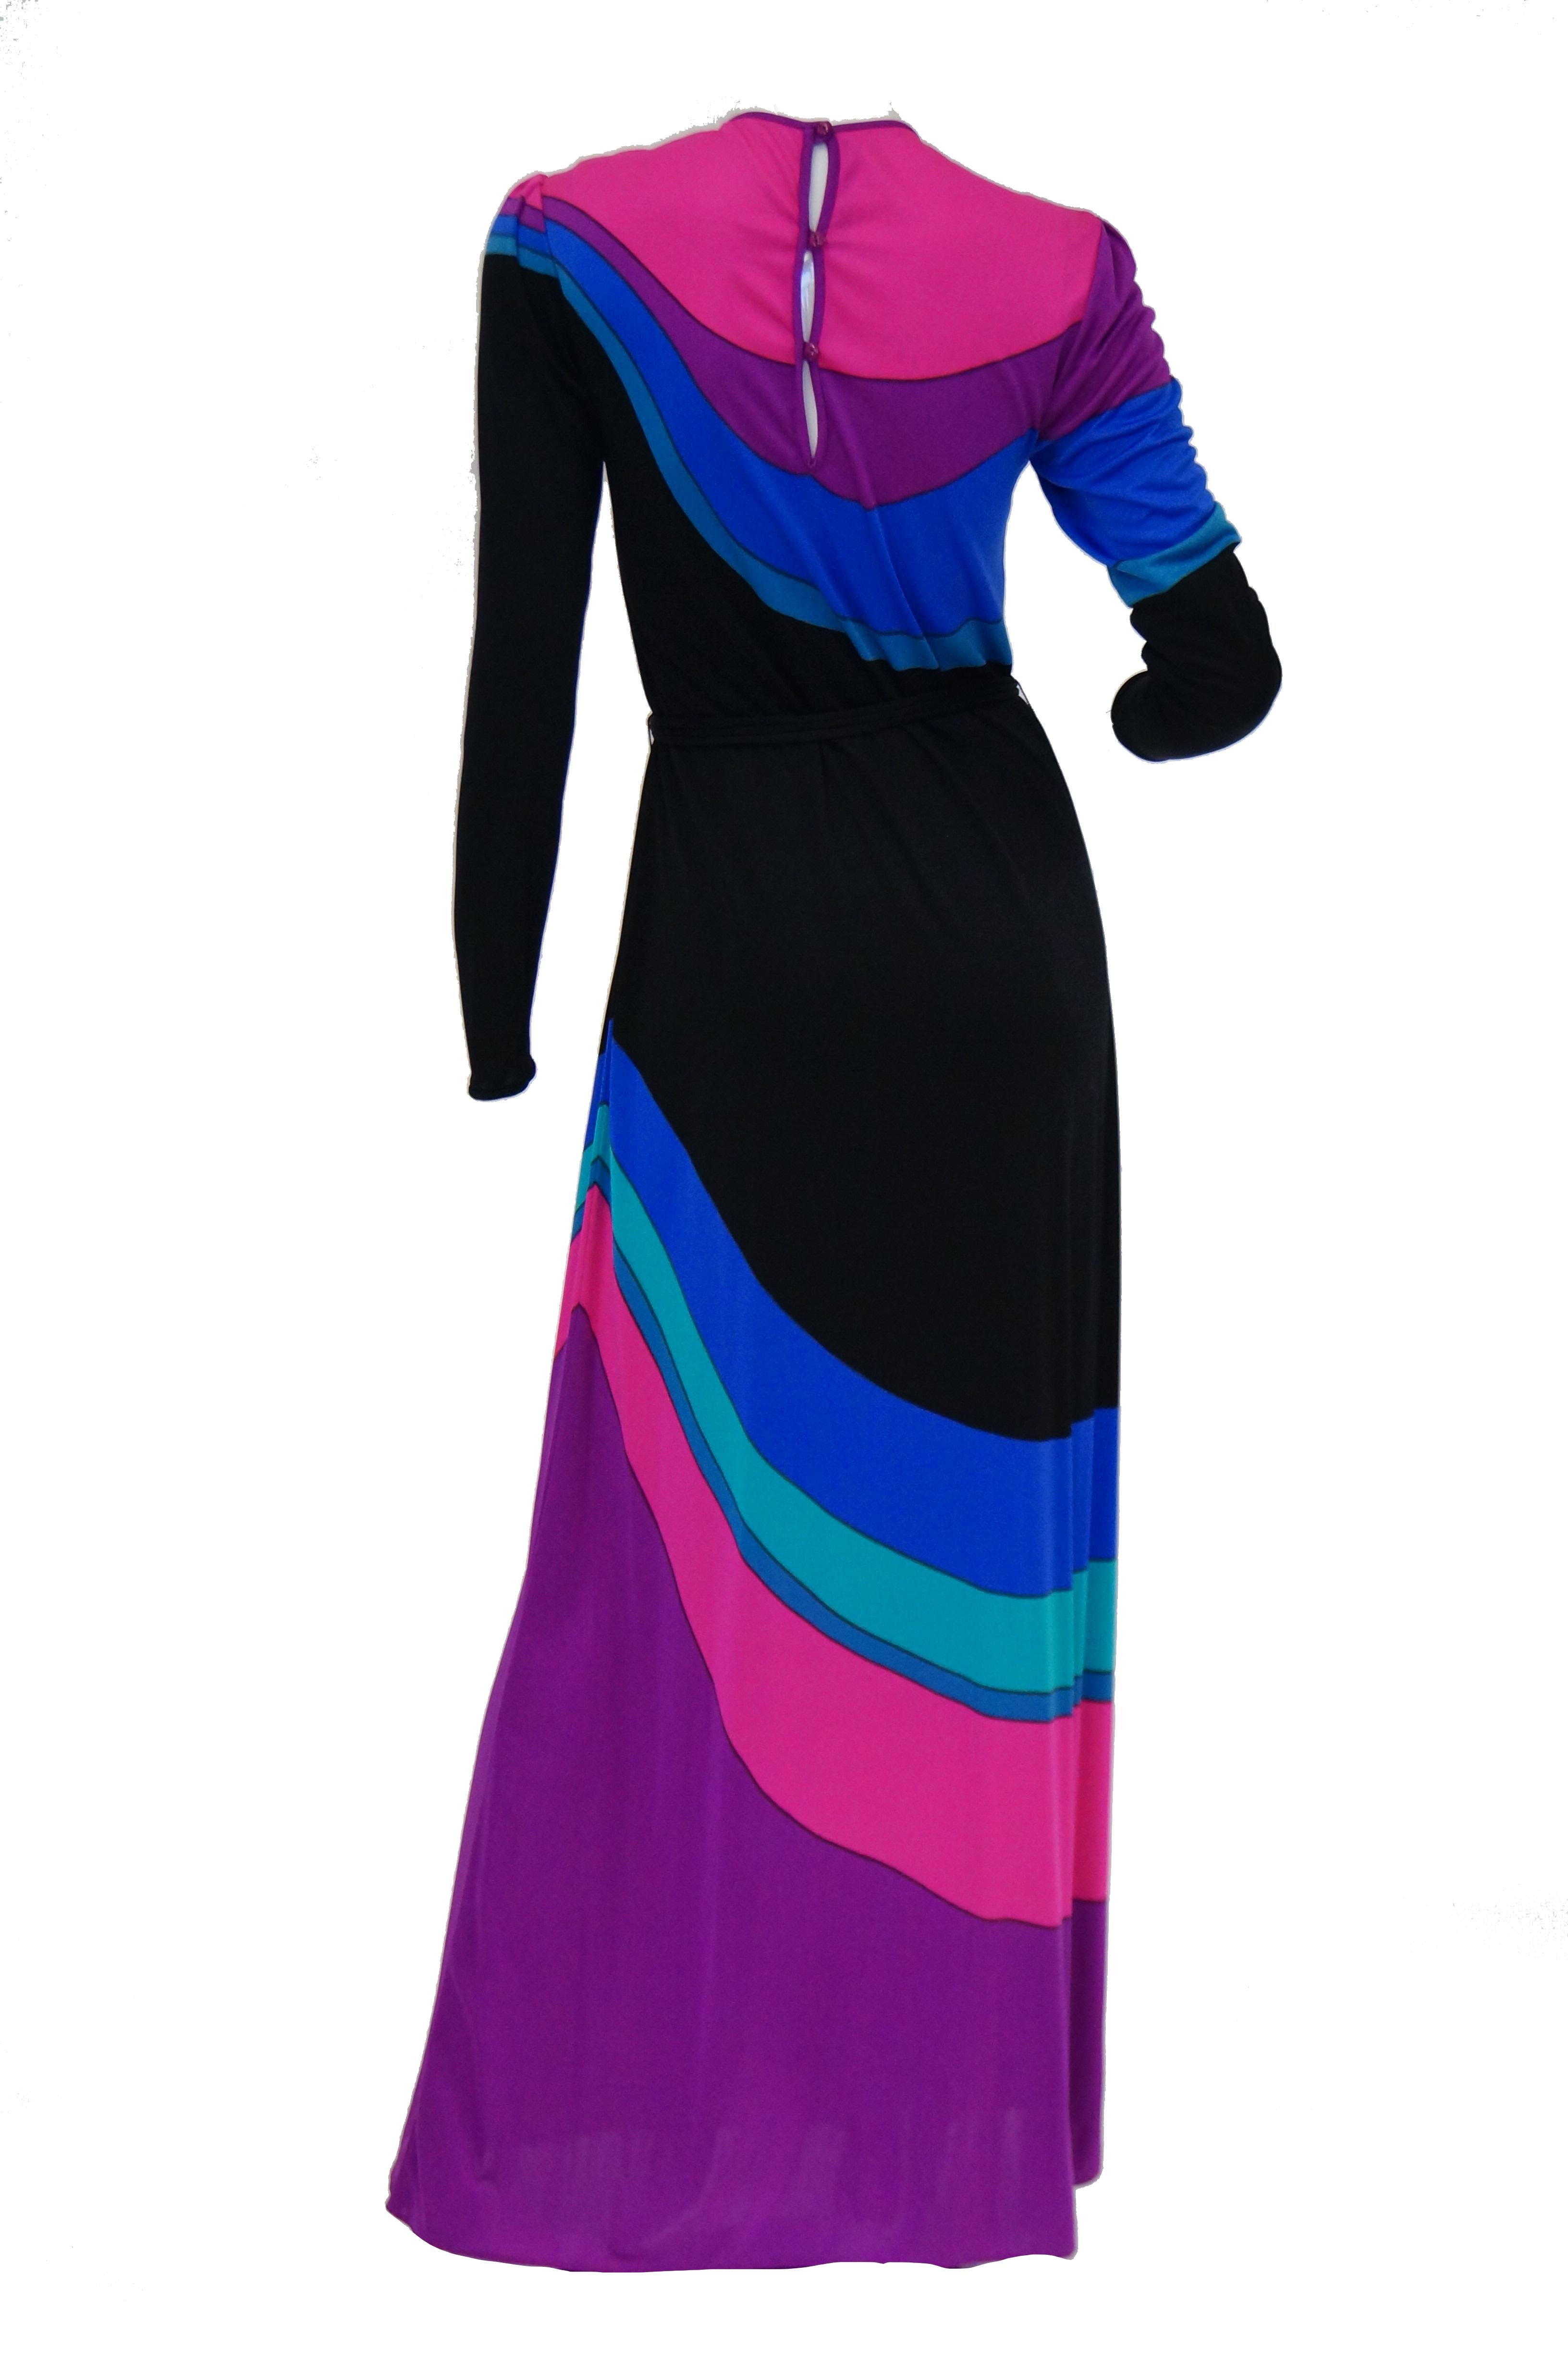 Brilliant late 1970s slinky knit maxi dress by Louis Feraud! The dress has long sleeves, a jewel collar, and a cinched waist further accented by a knit tube belt. The dress features an amazing Peter - Max - style technicolor rainbow - like swirl